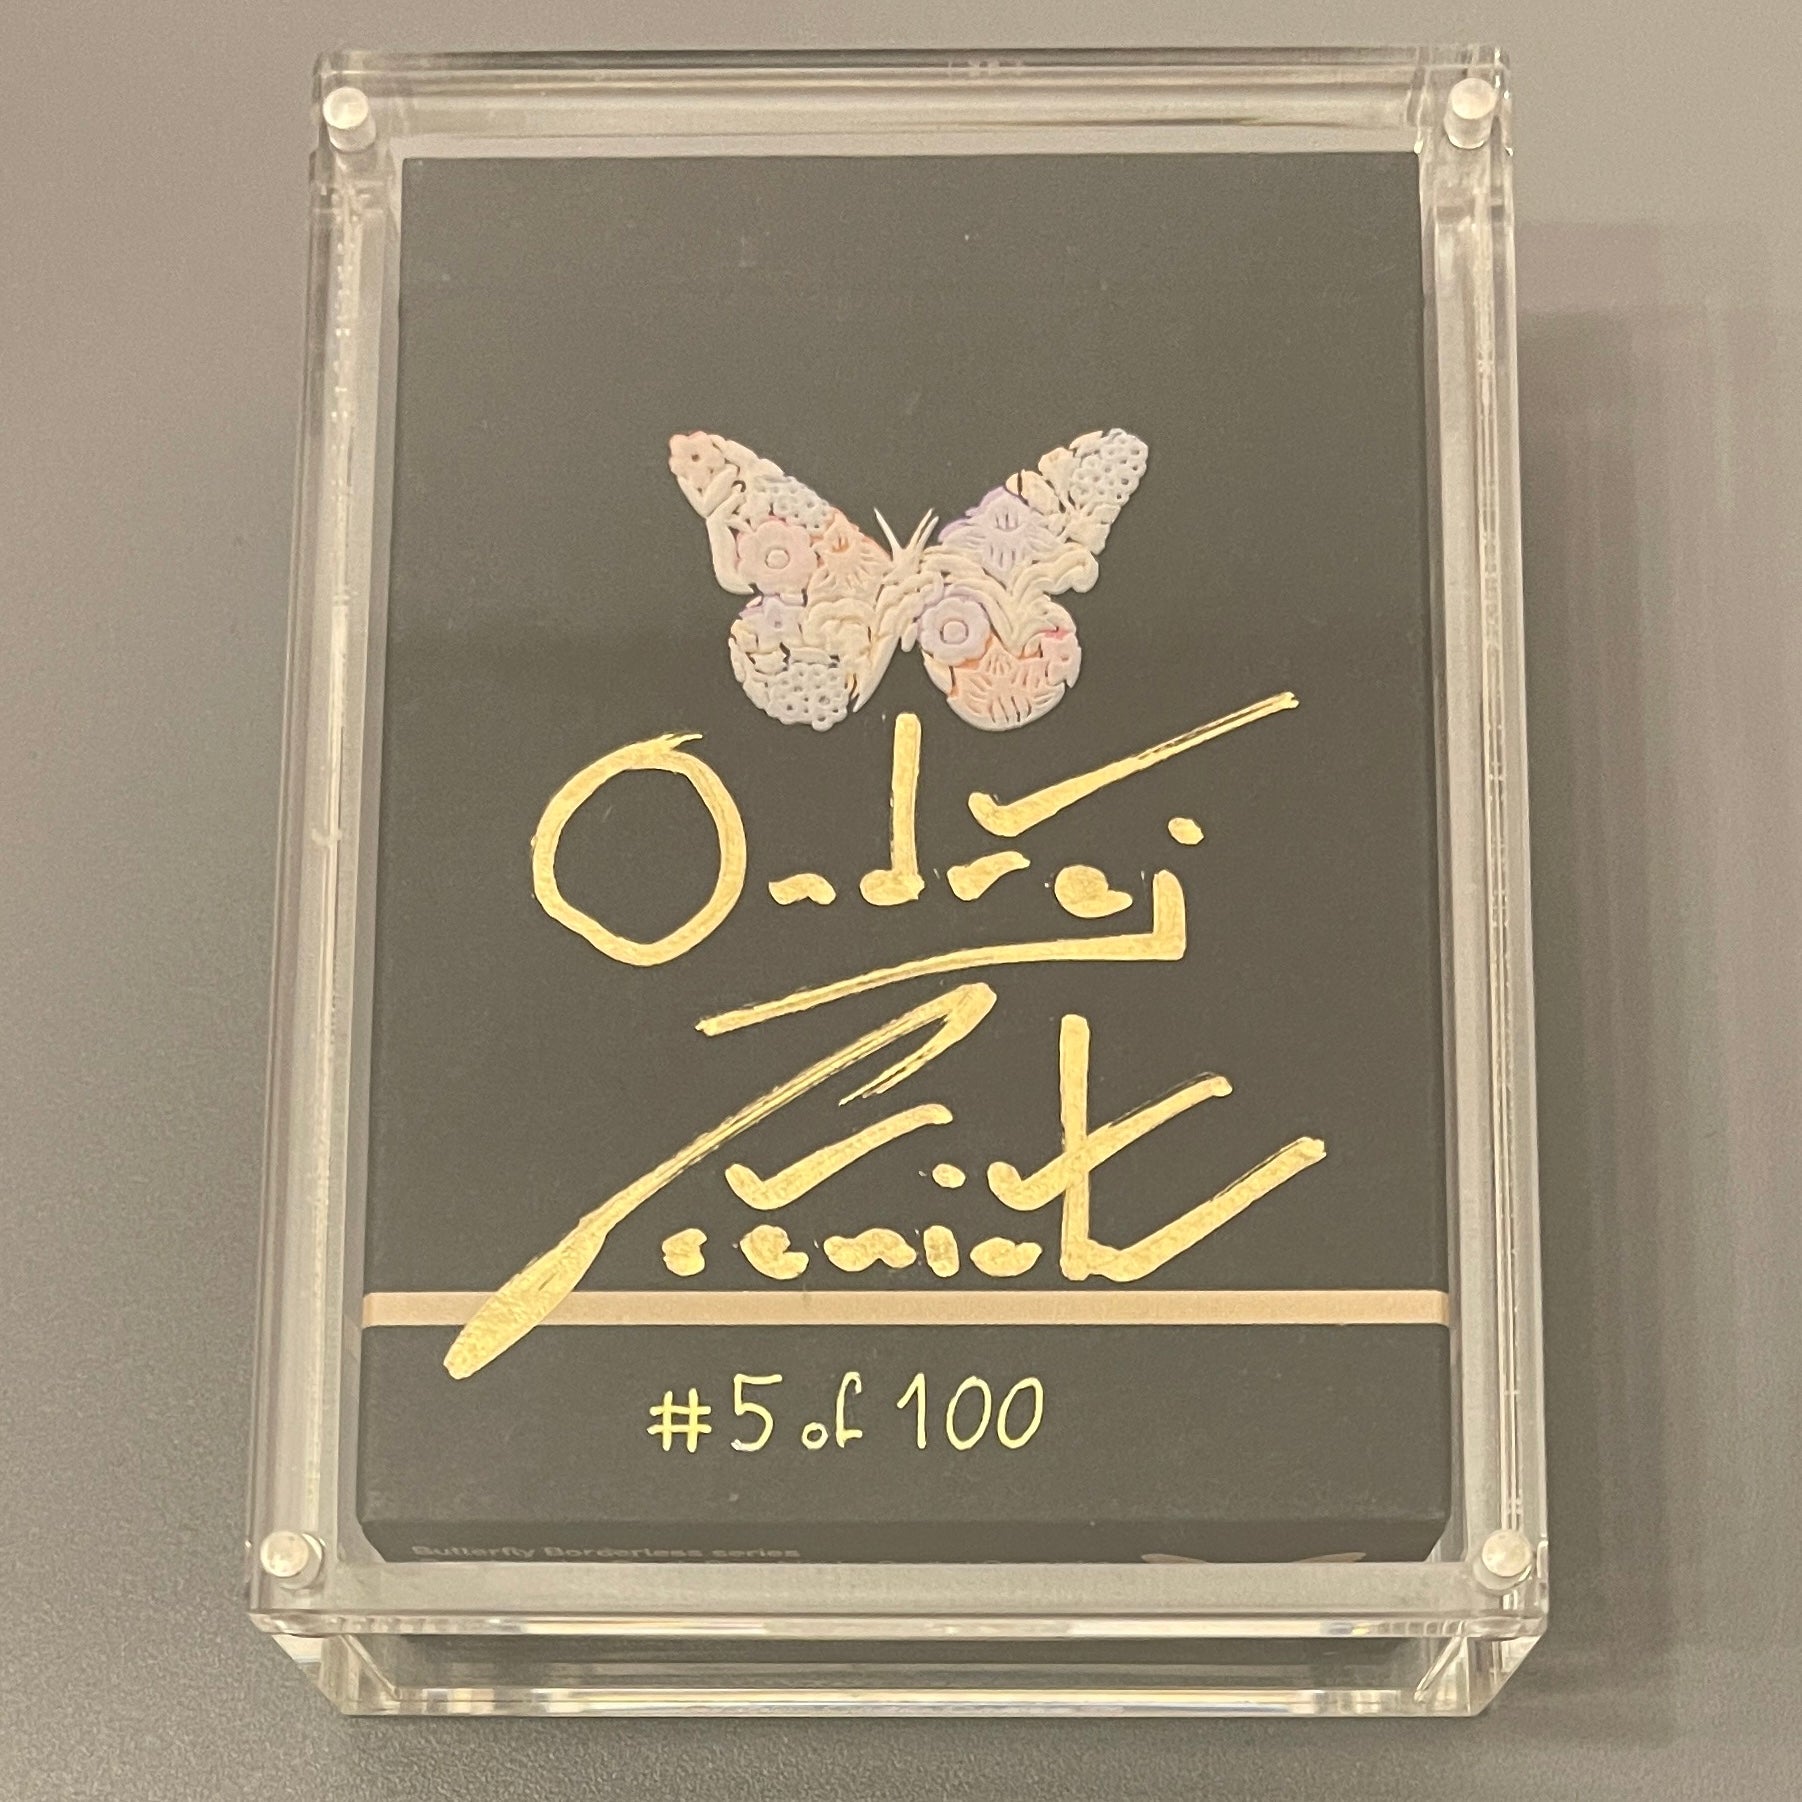 Butterfly Deck Zero (#5 of 100) [AUCTION]